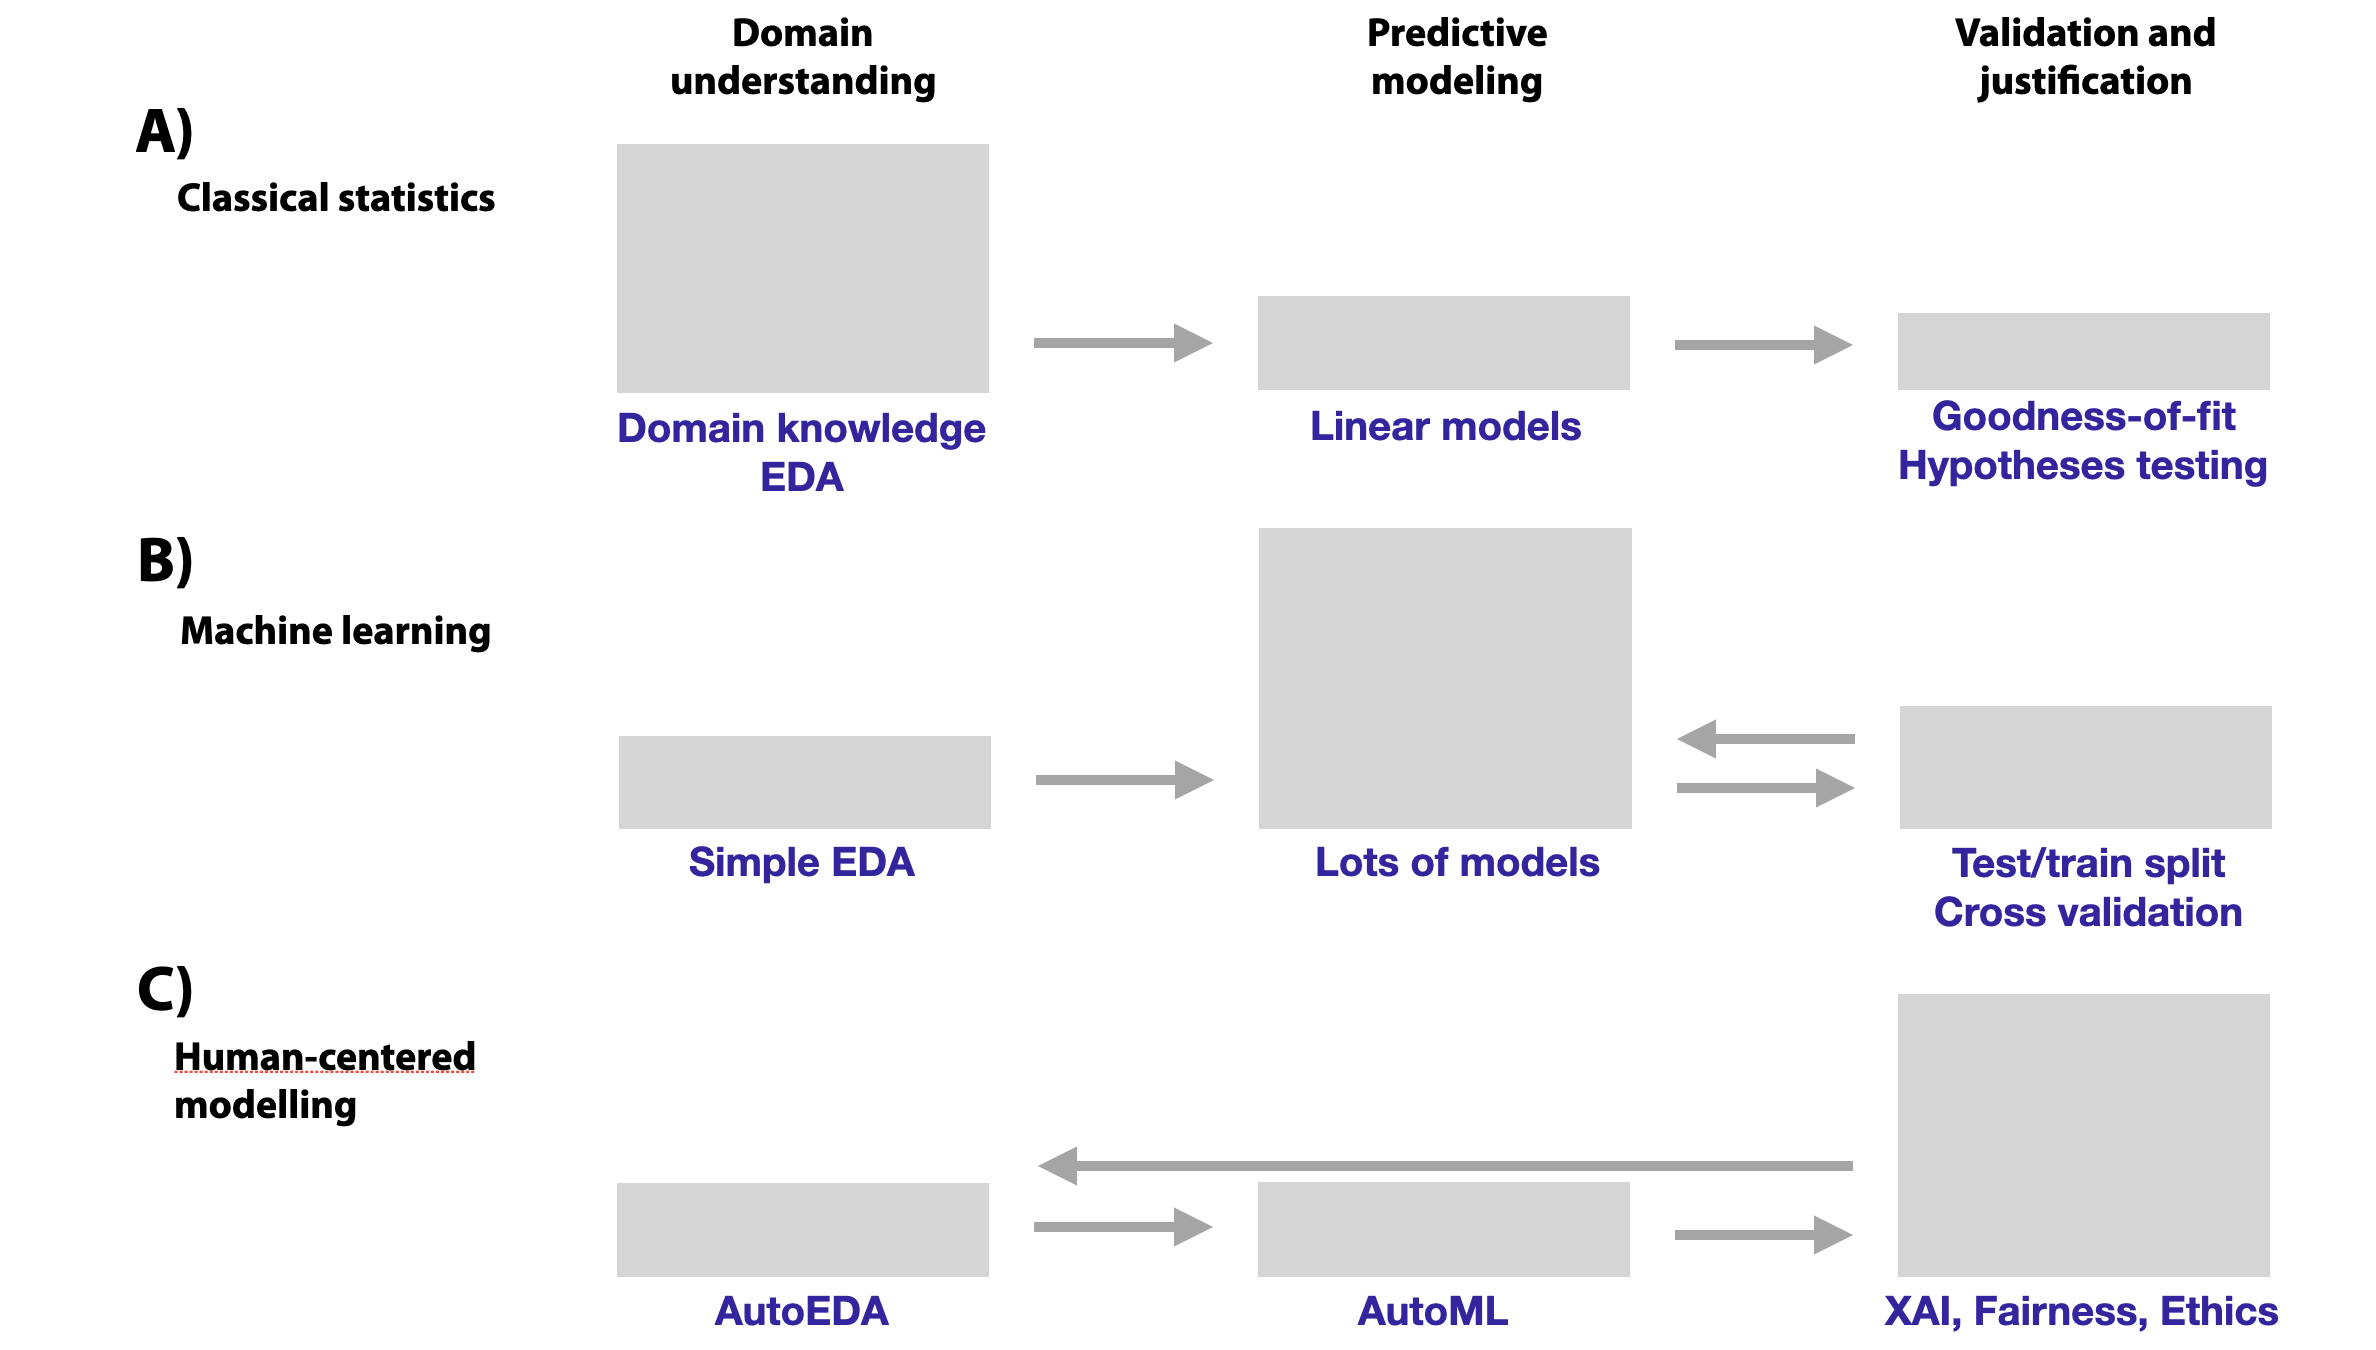 Shift in the relative importance and effort (symbolically represented by the shaded boxes) put in different phases of data-driven modelling. Arrows show feedback loops in the modelling process. (A) In classical statistics, modelling is often based on a deep understanding of the application domain combined with exploratory data analysis (EDA). Most often, (generalized) linear models are used. Model validation includes goodness-of-fit evaluation and hypothesis testing. (B) In machine learning (ML), domain knowledge and EDA are often limited. Instead, flexible models are fitted to large volumes of data to obtain a model offering a good predictive performance. Evaluation of the performance (applying strategies like cross-validation to deal with overfitting) gains in importance, as validation provides feedback to model construction. (C) In the (near?) future, auto-EDA and auto-ML will shift focus even further to model validation that will include the use of explainable artificial intelligence (XAI) techniques and evaluation of fairness, ethics, etc. The feedback loop is even longer now, as the results from model validation will also be helping in domain understanding.